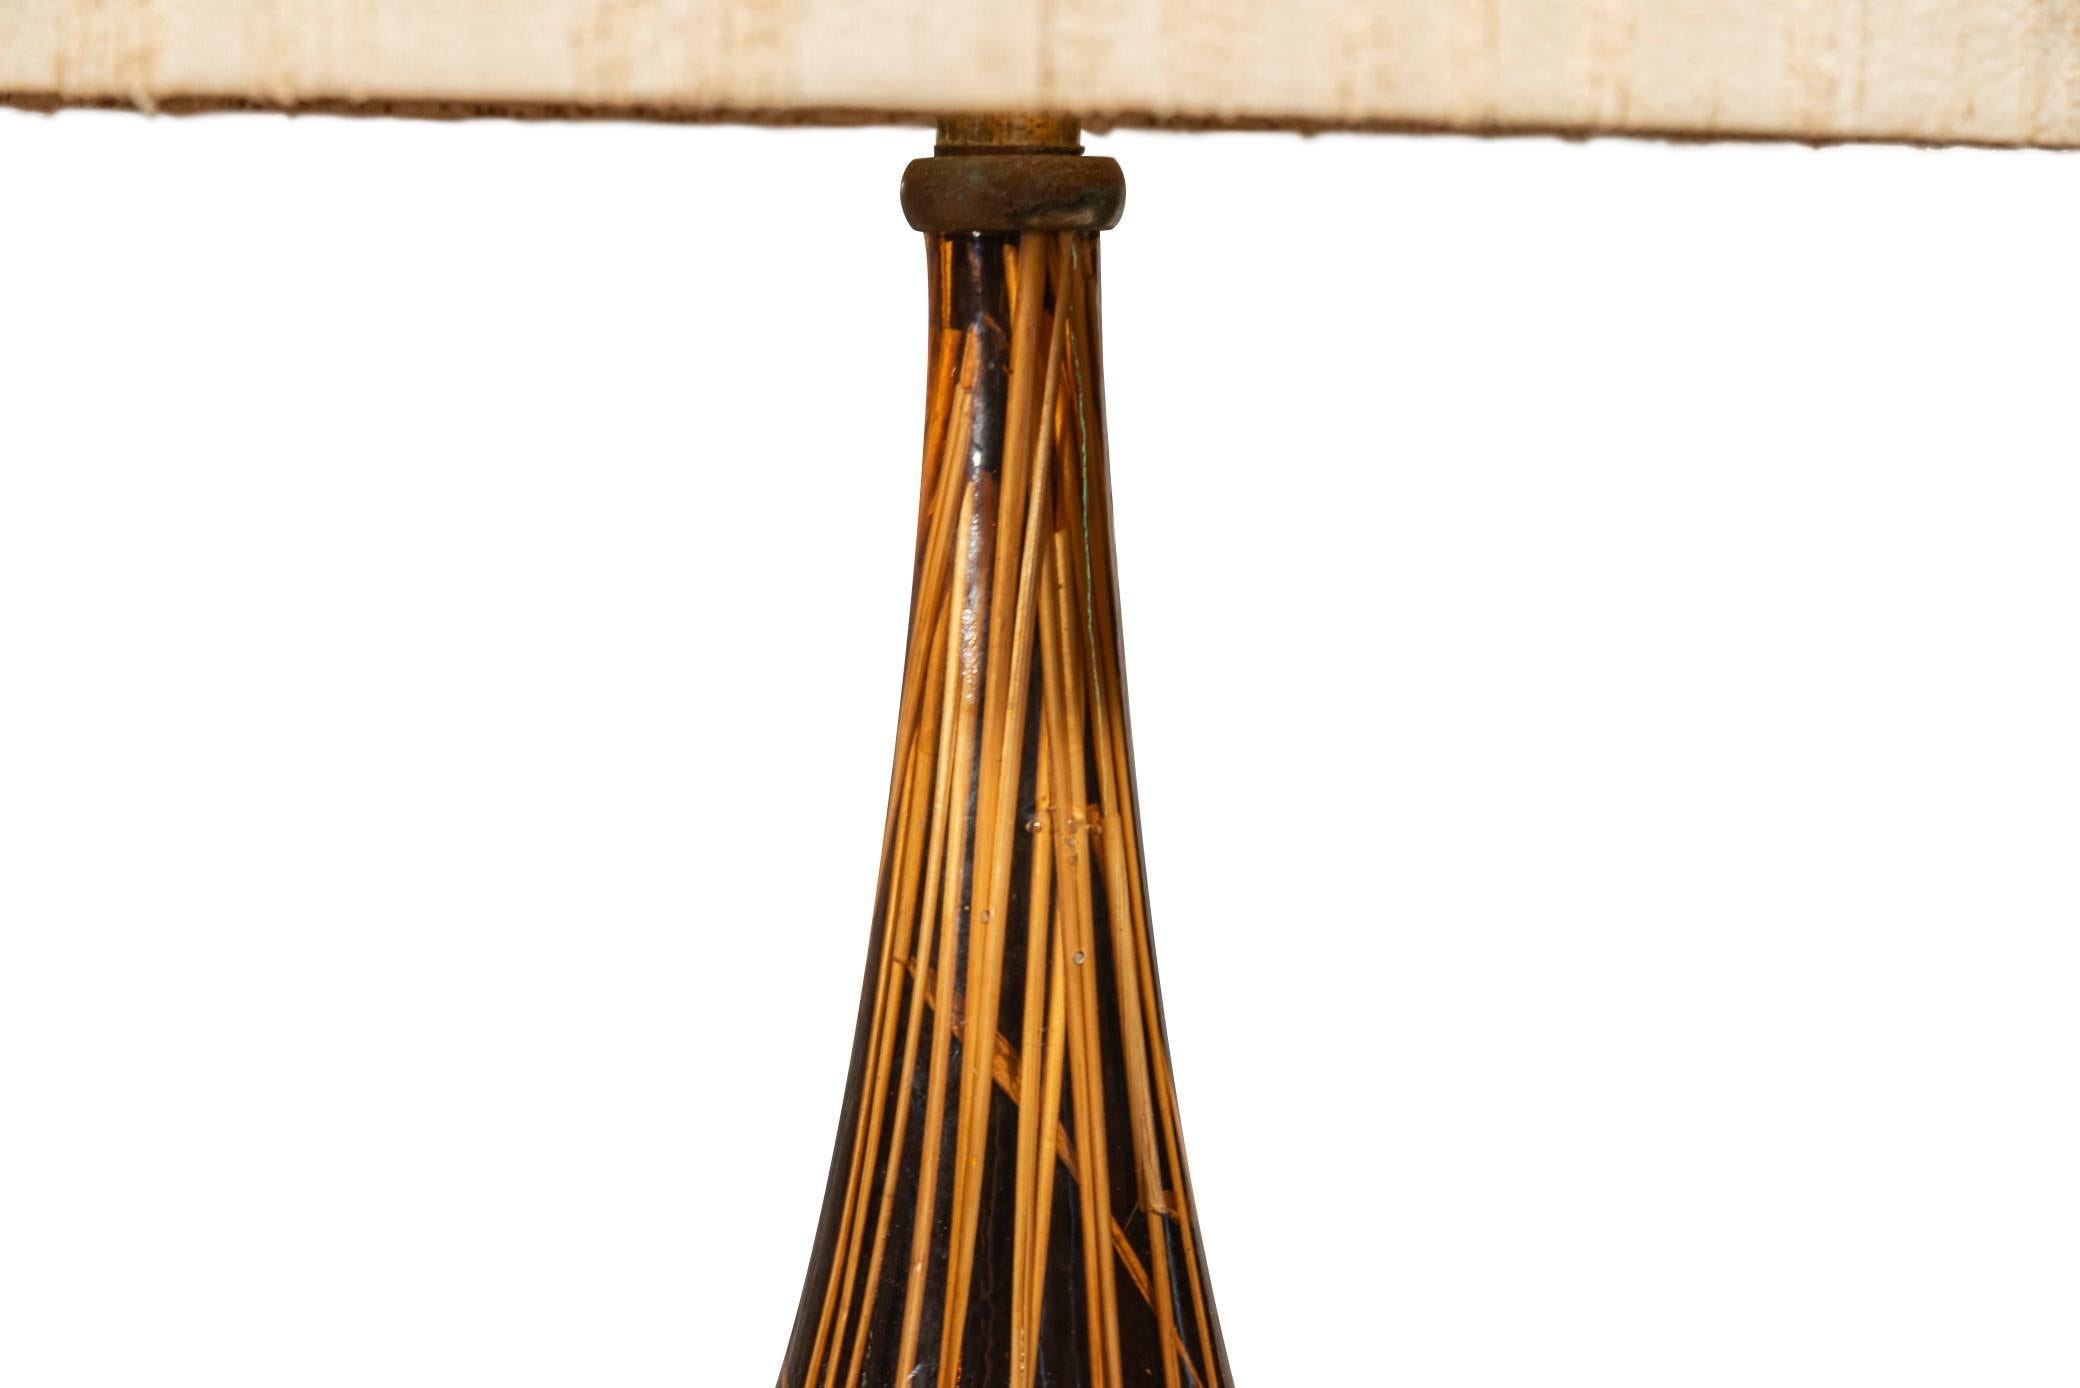 Table lamp,
Decorated with ear of wheat inclusions,
Resin and brass, 
With lampshade, 
Italy, circa 1960.

Measures: Height 84 cm, diameter 40 cm.